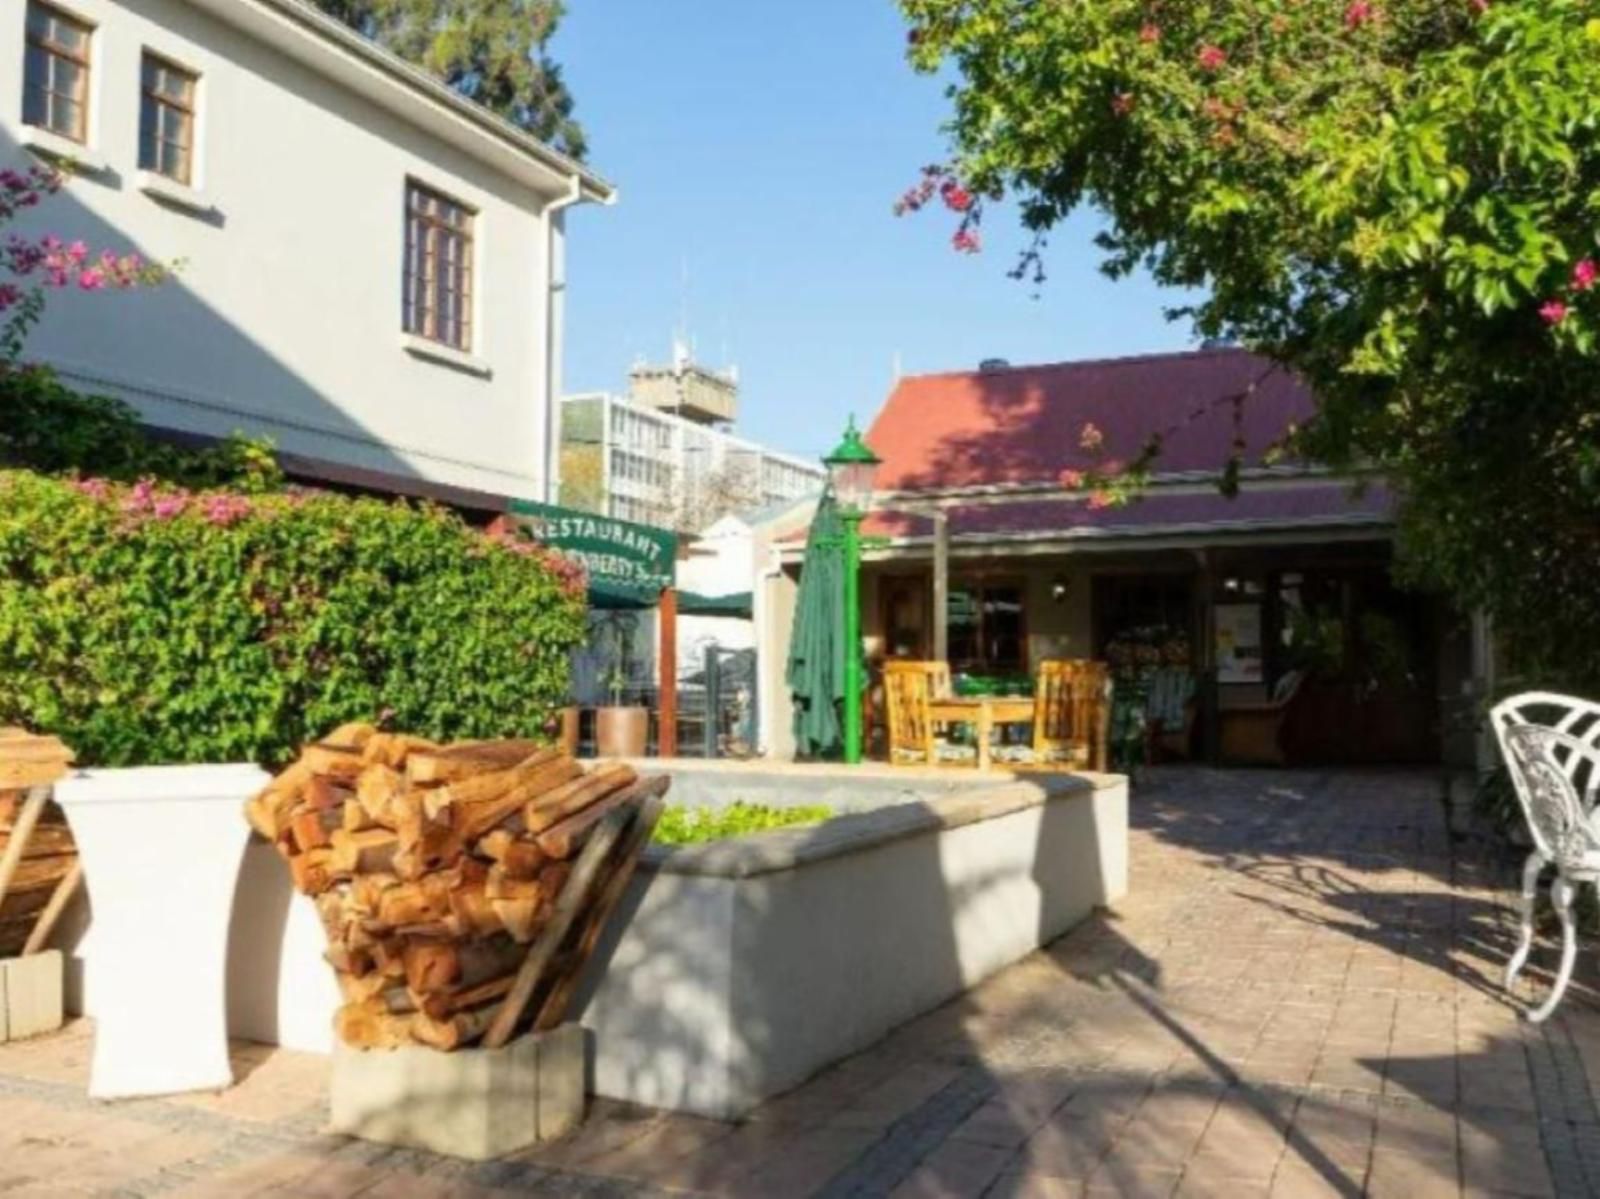 Turnberry Boutique Hotel Oudtshoorn Western Cape South Africa House, Building, Architecture, Bar